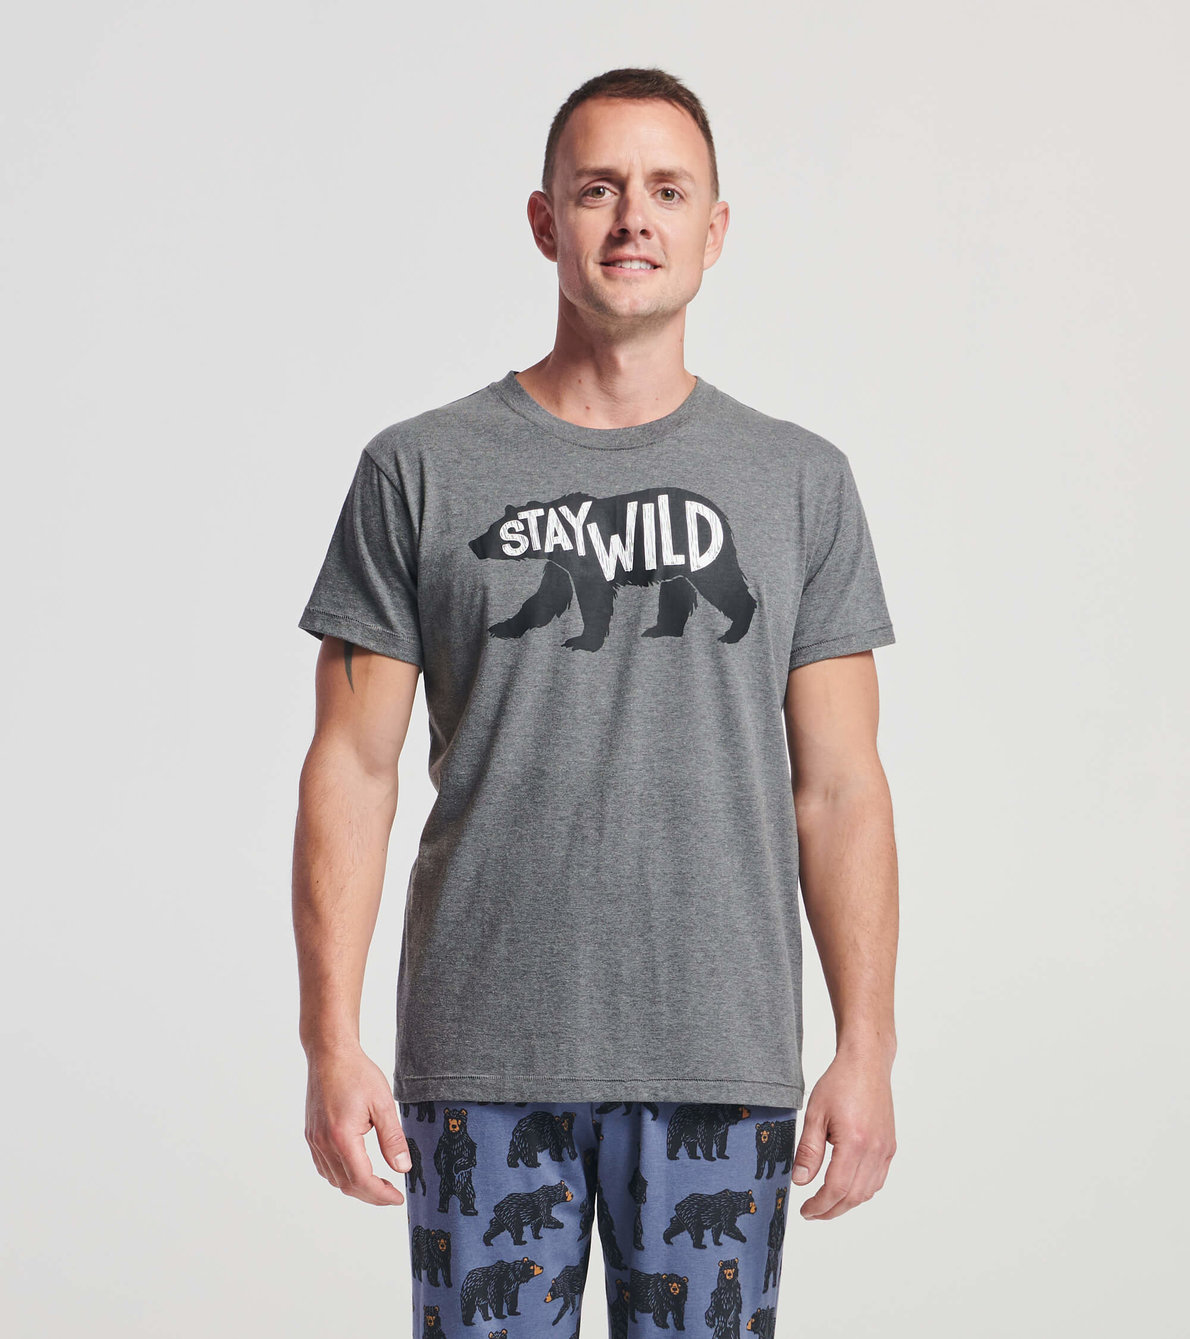 View larger image of Stay Wild Men's Tee